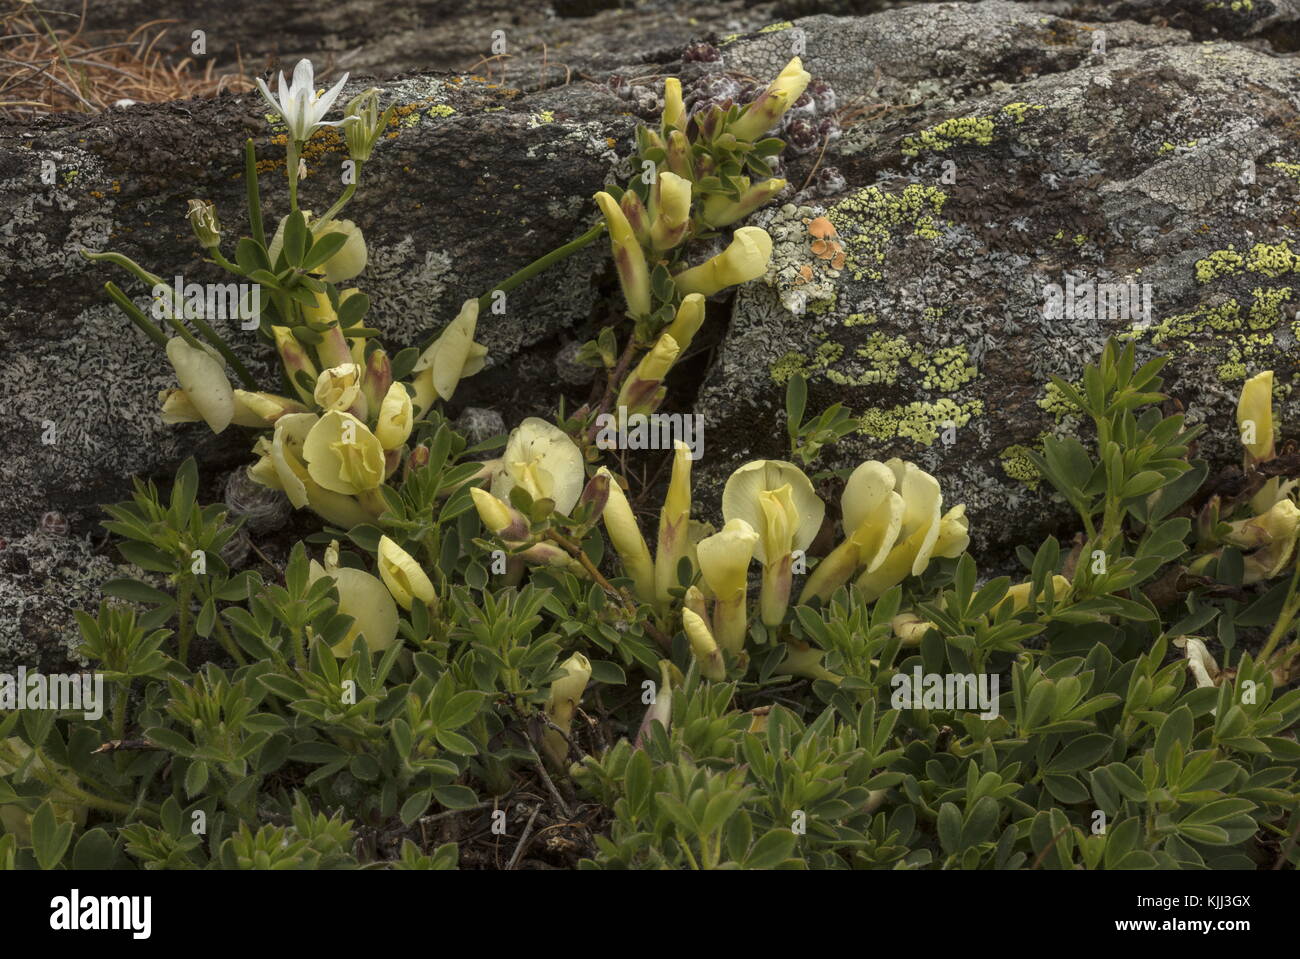 A dwarf broom, Chamaecytisus hirsutus ssp pumilus, in the Maritime Alps, France. Stock Photo